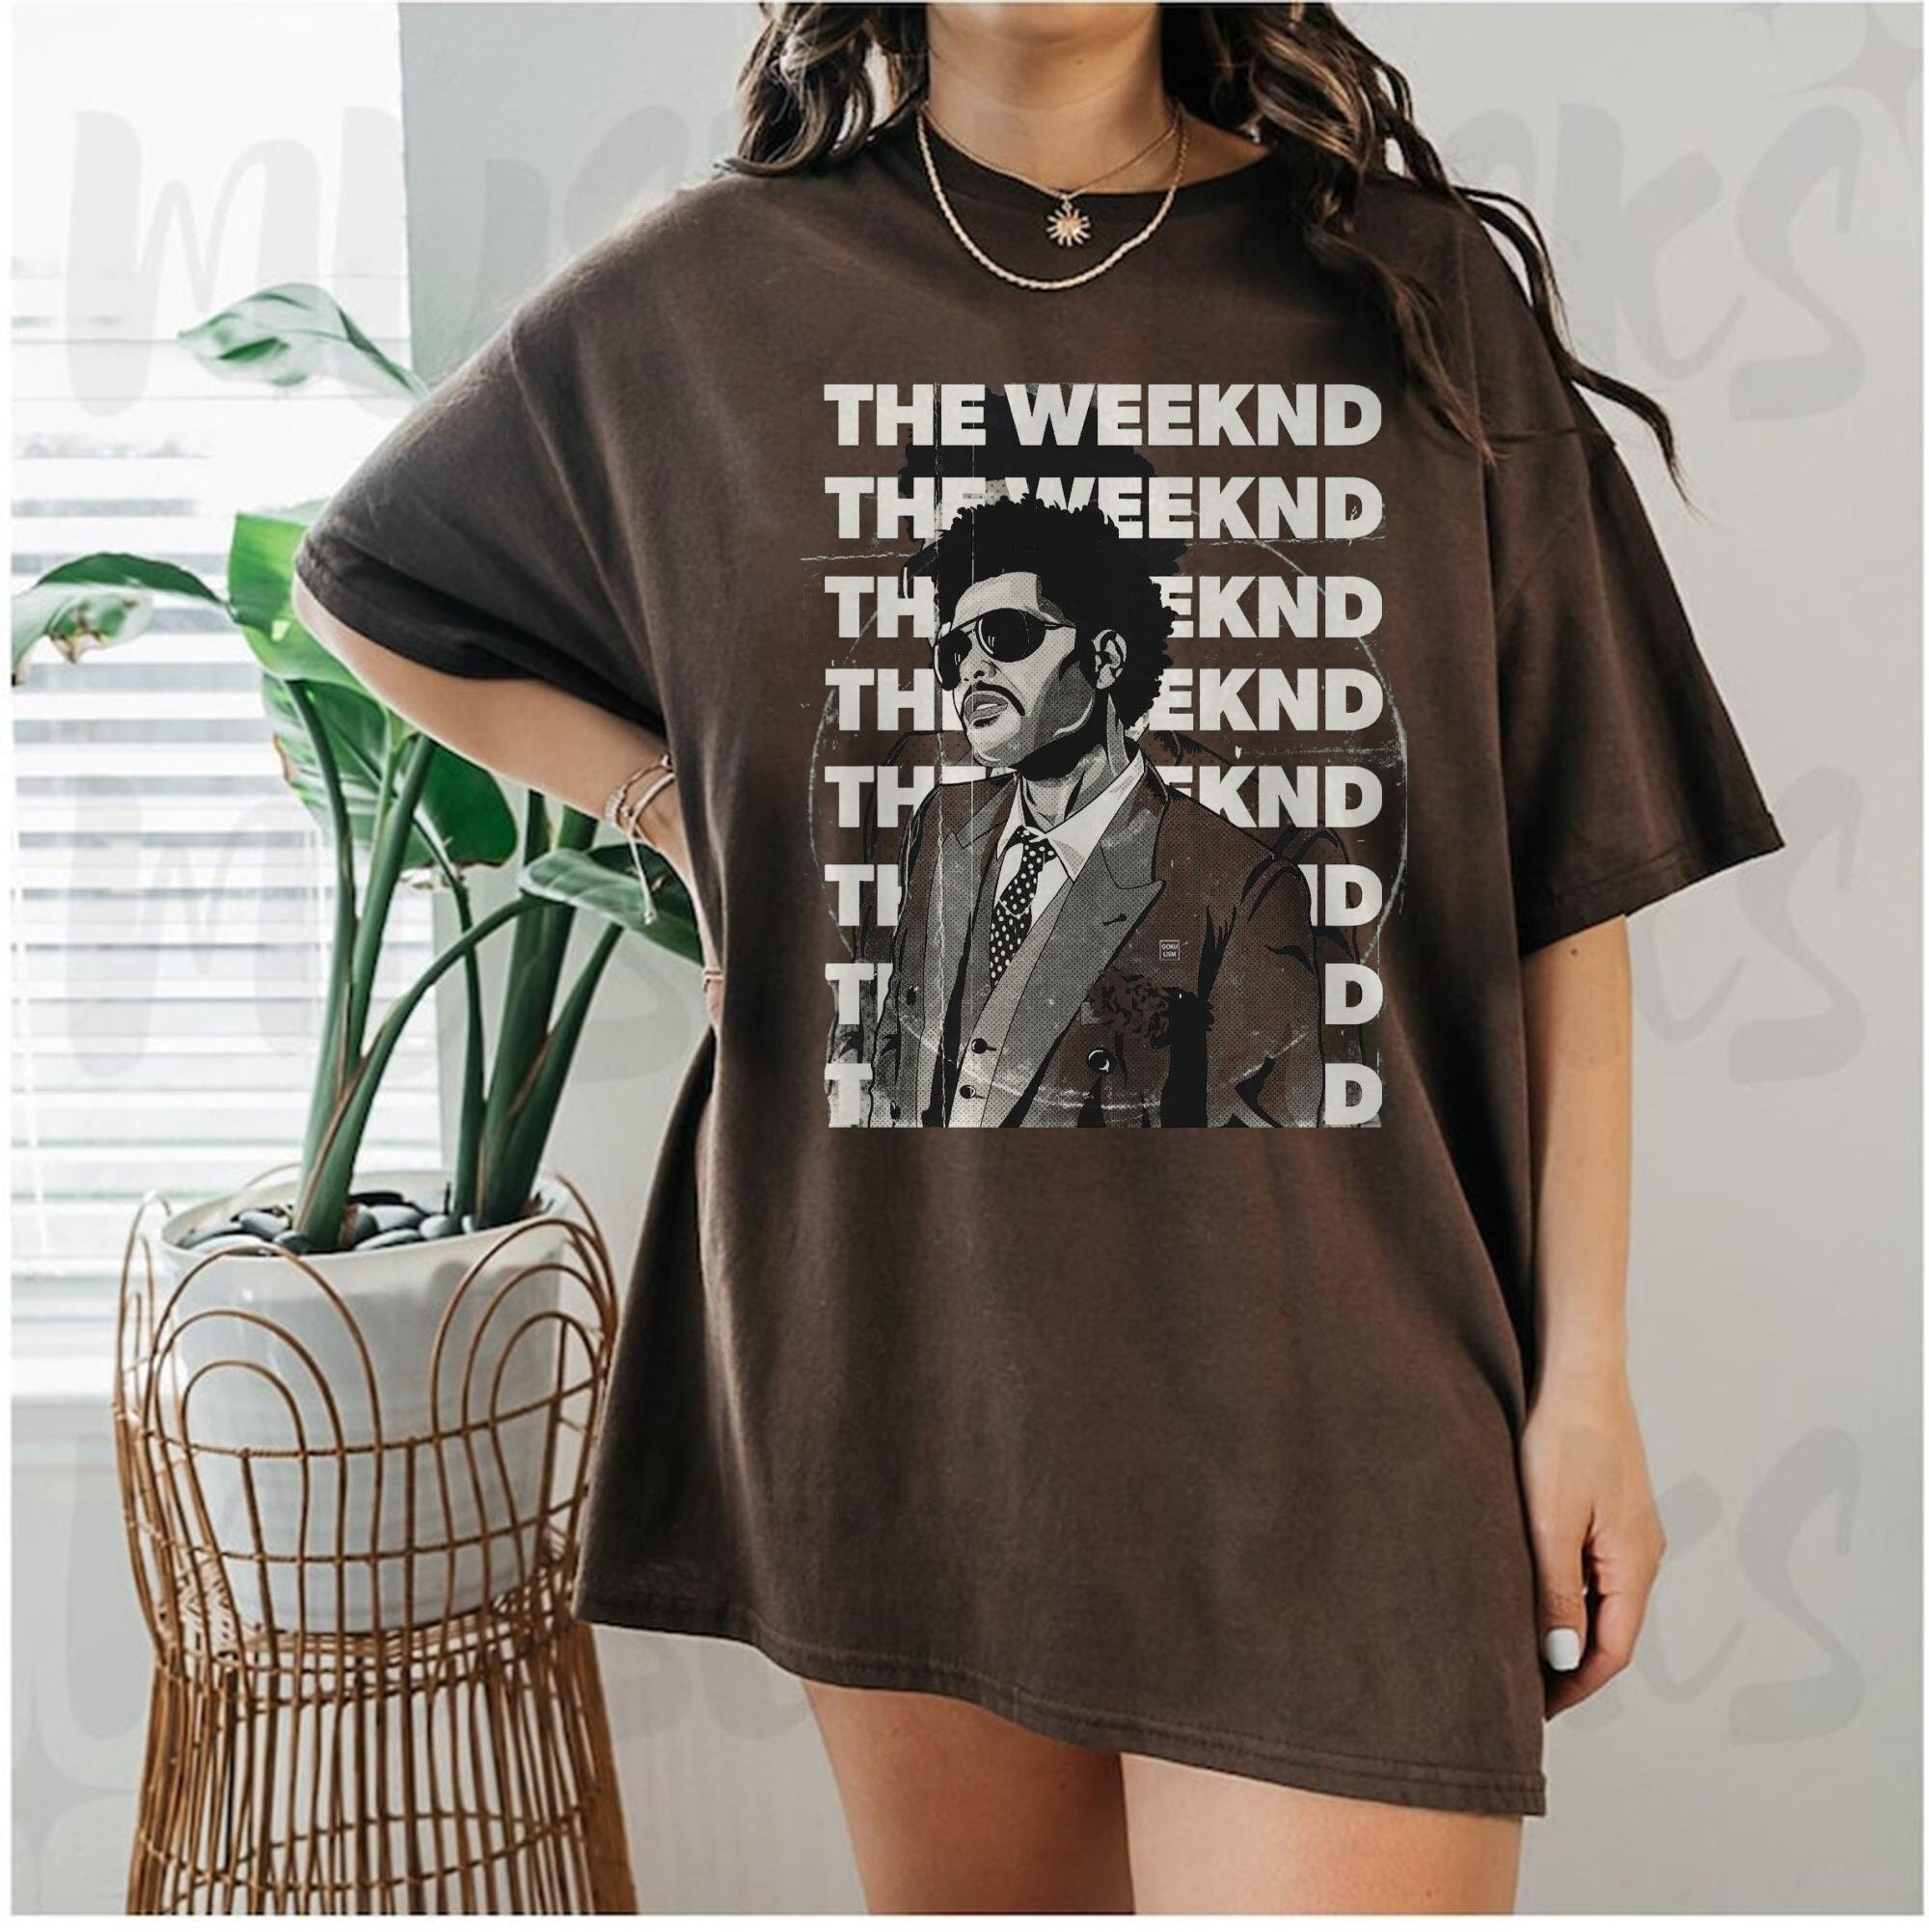 The Weeknd T-shirts - The Weeknd 90s Vintage Unisex Retro T-shirt